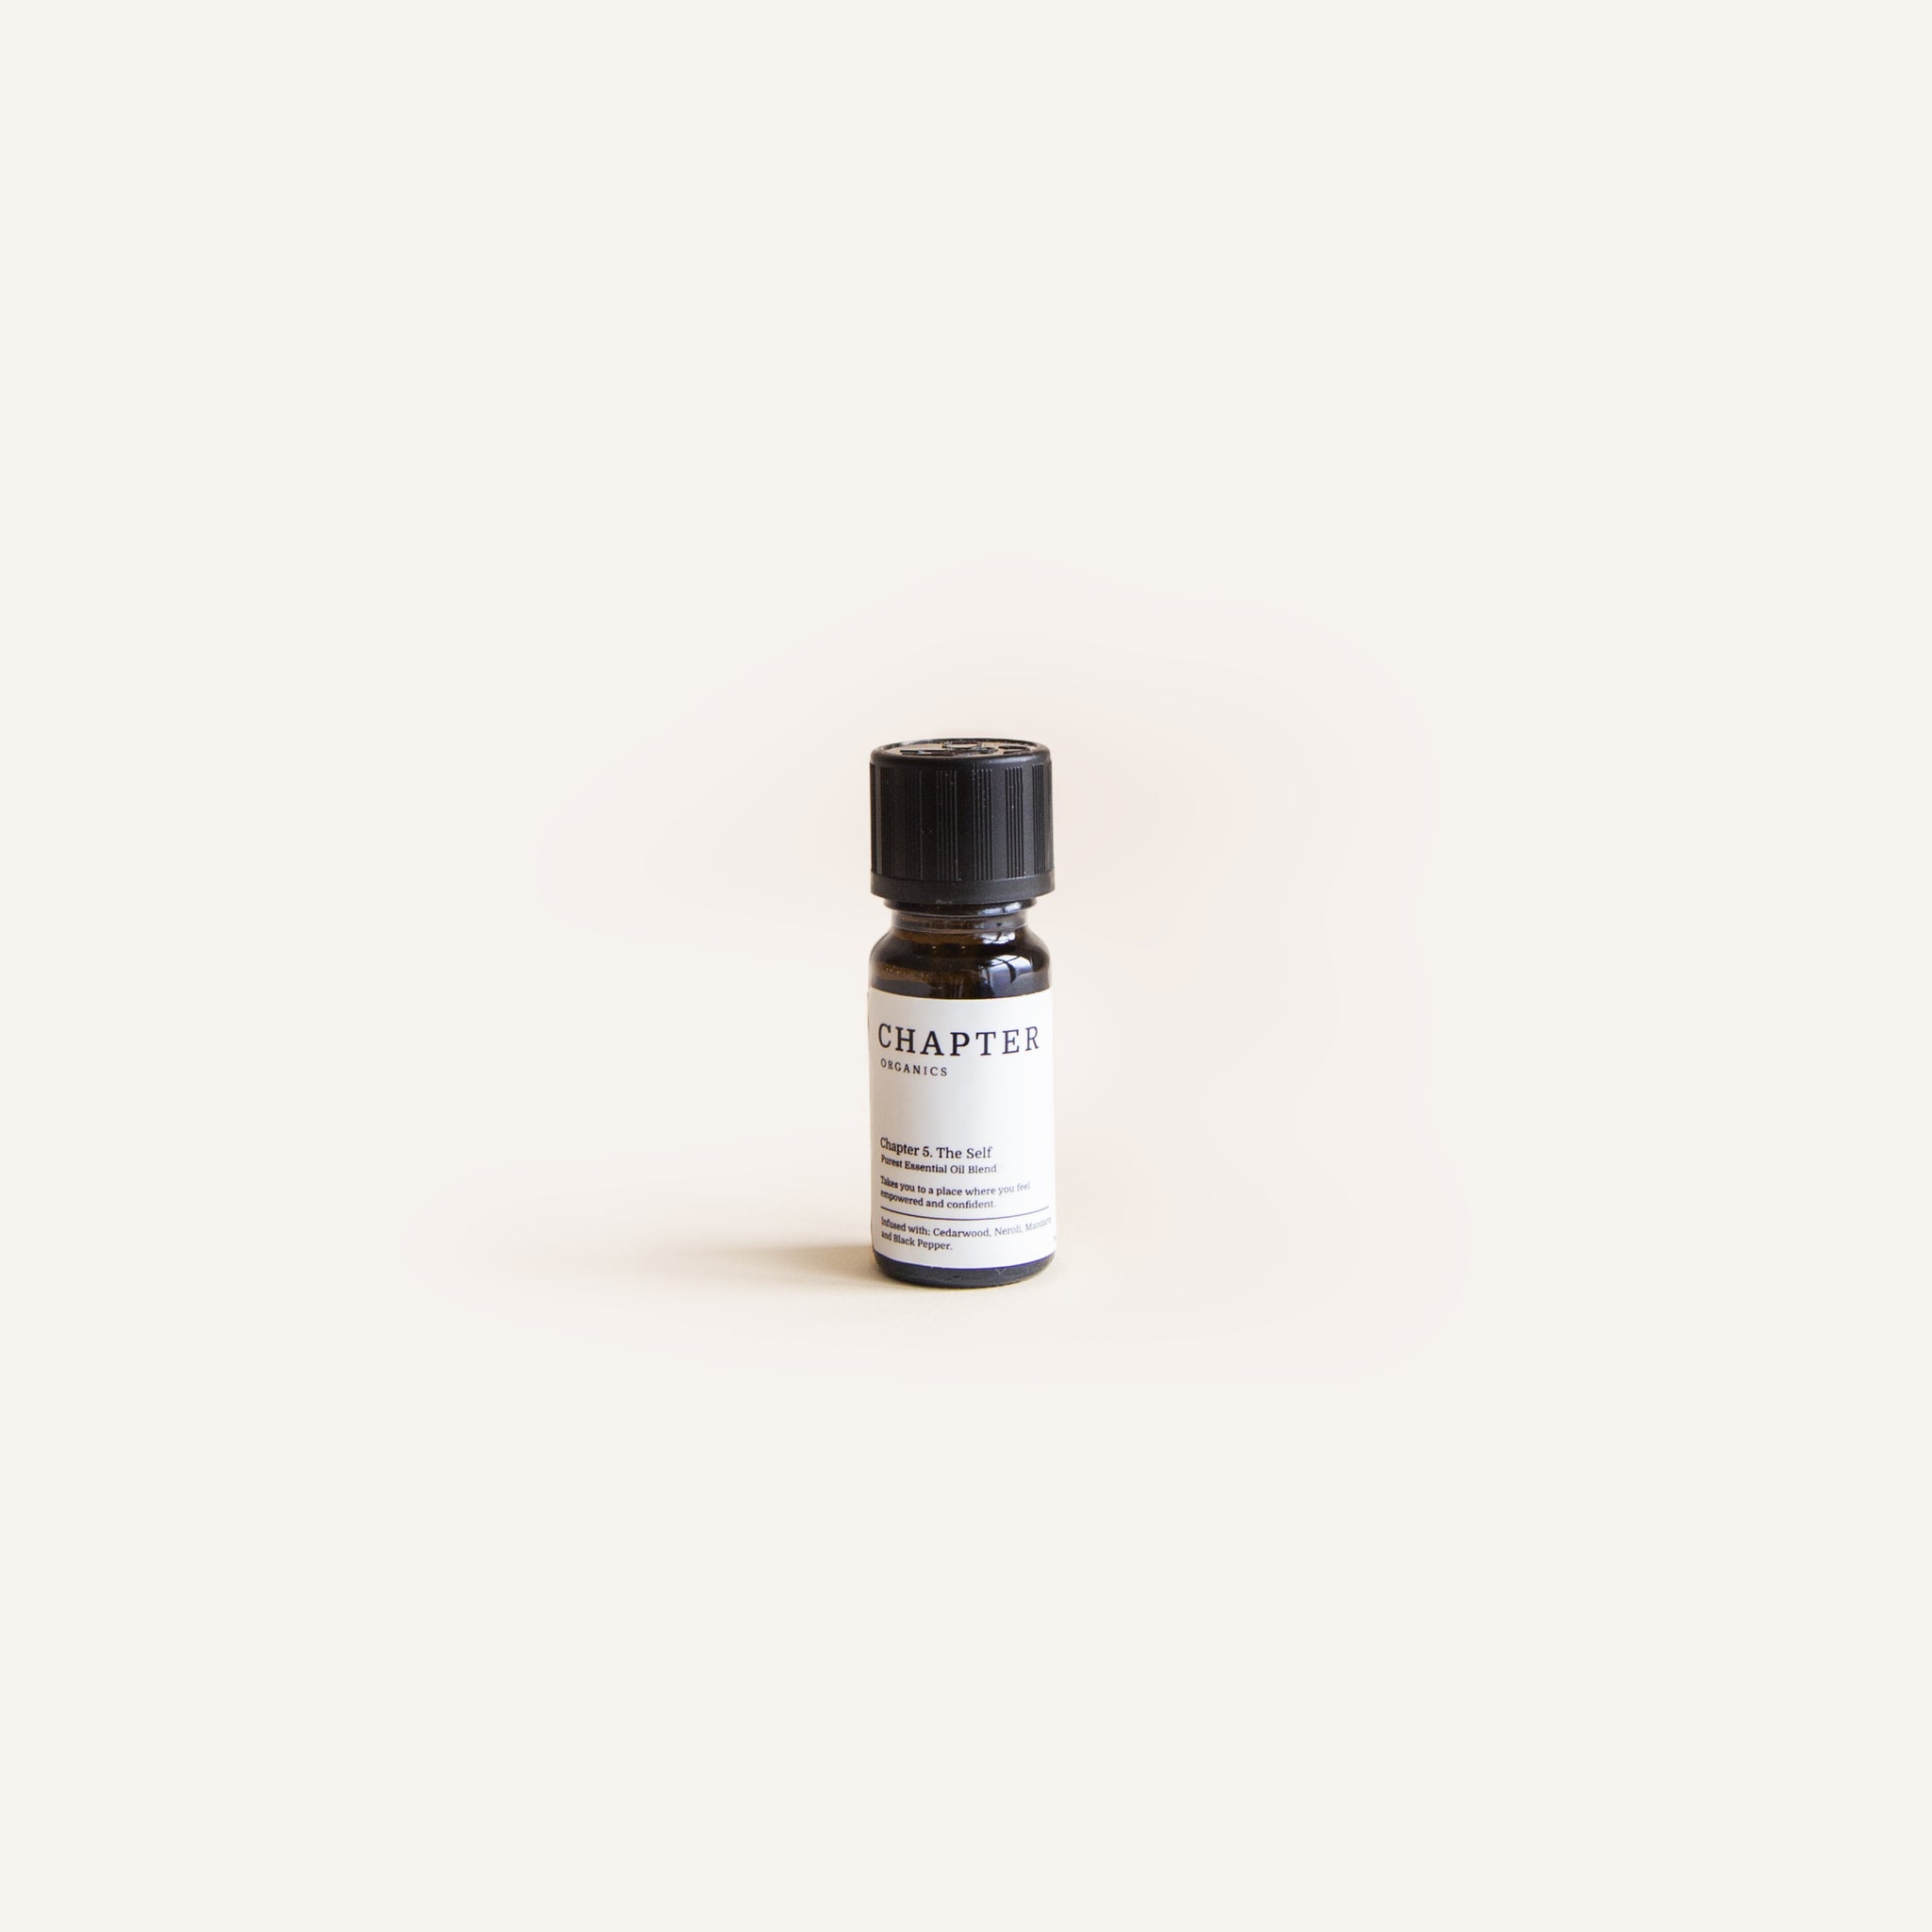 The Peace Purest Essential Oil Blend